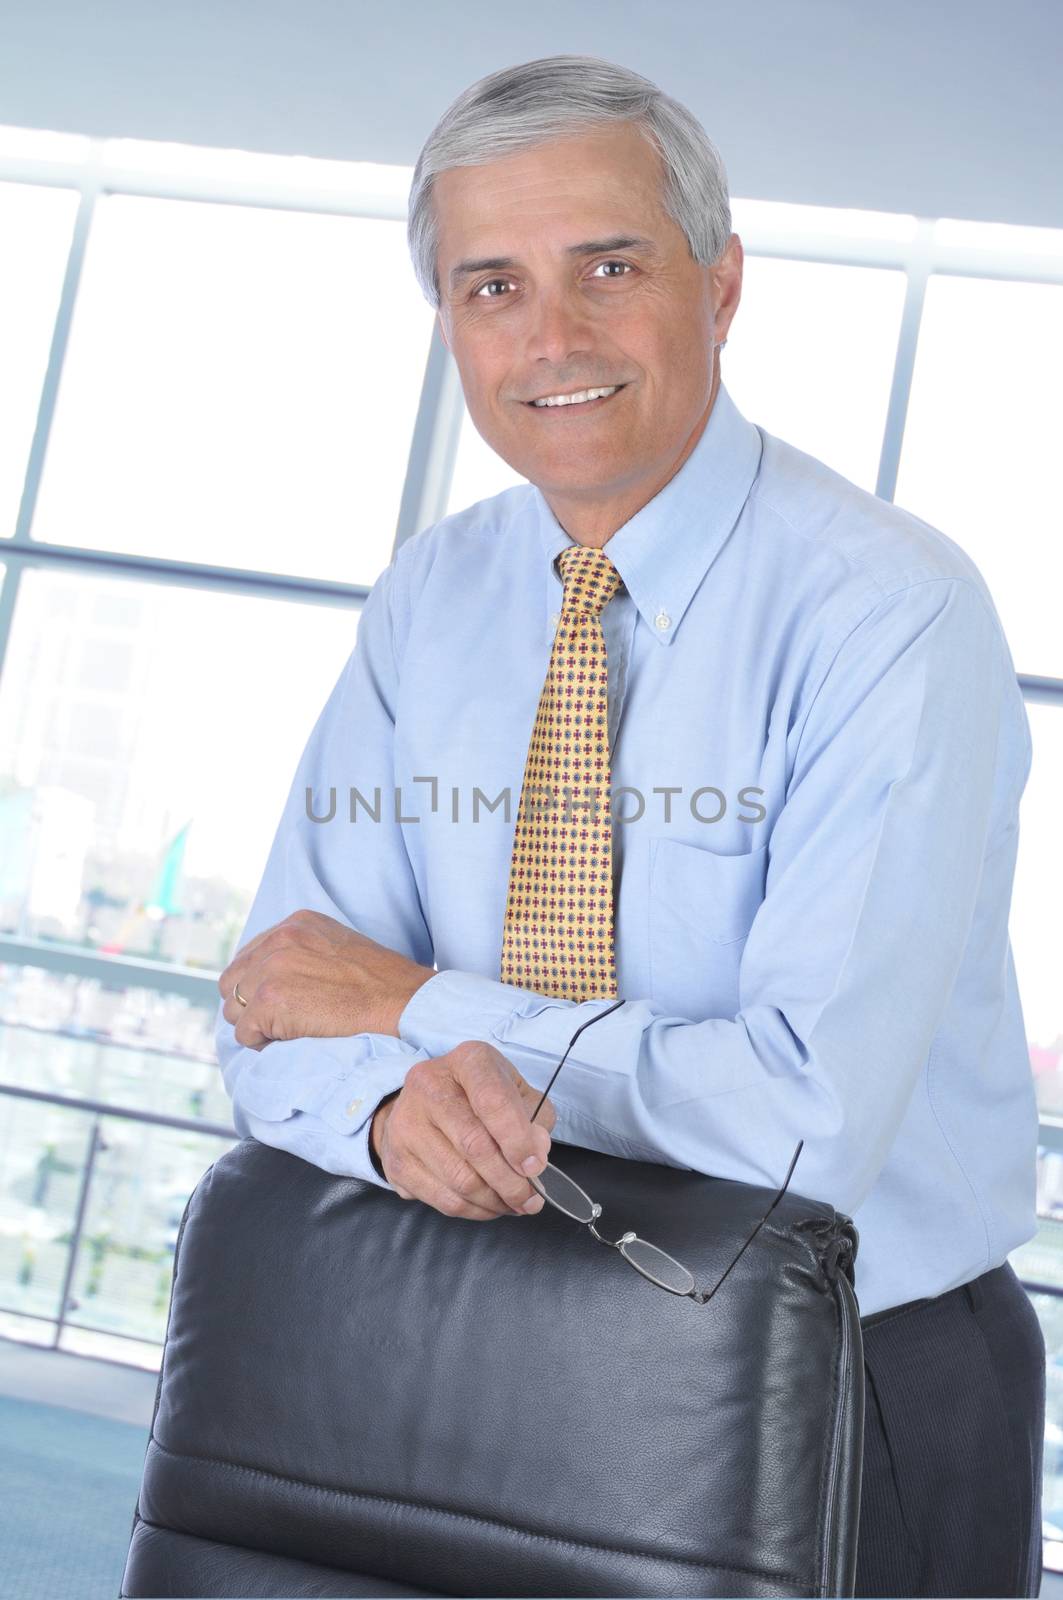 Middle aged Businessman leaning on the back of his chair in office setting